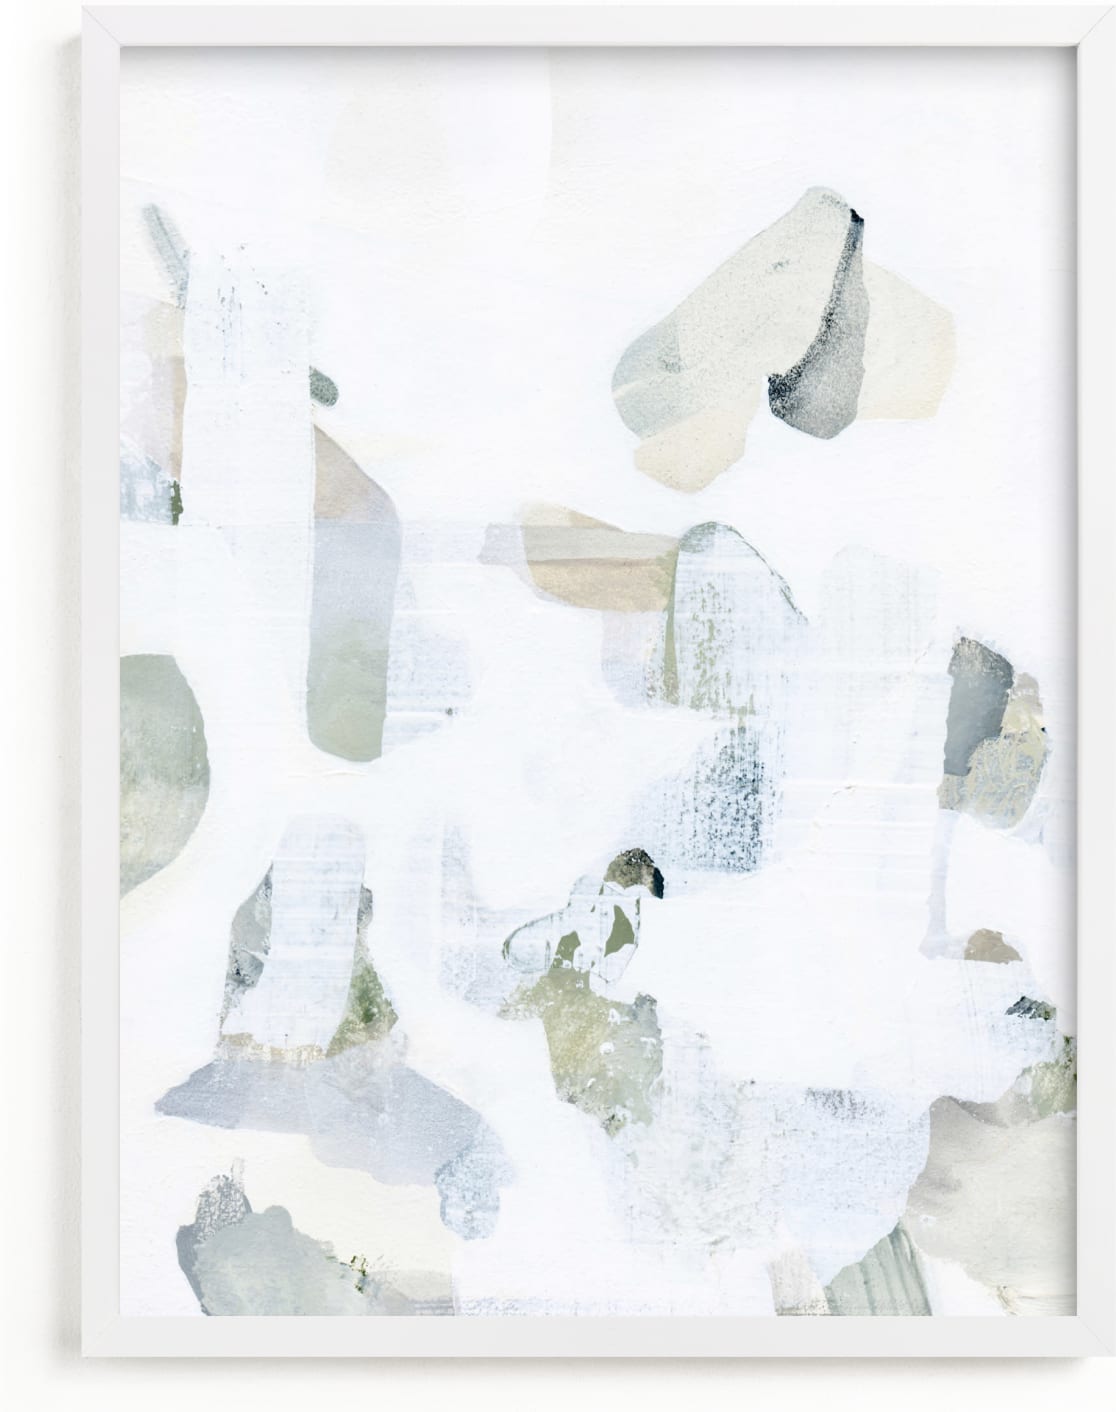 This is a white art by Ashleigh Ninos called Fragment.